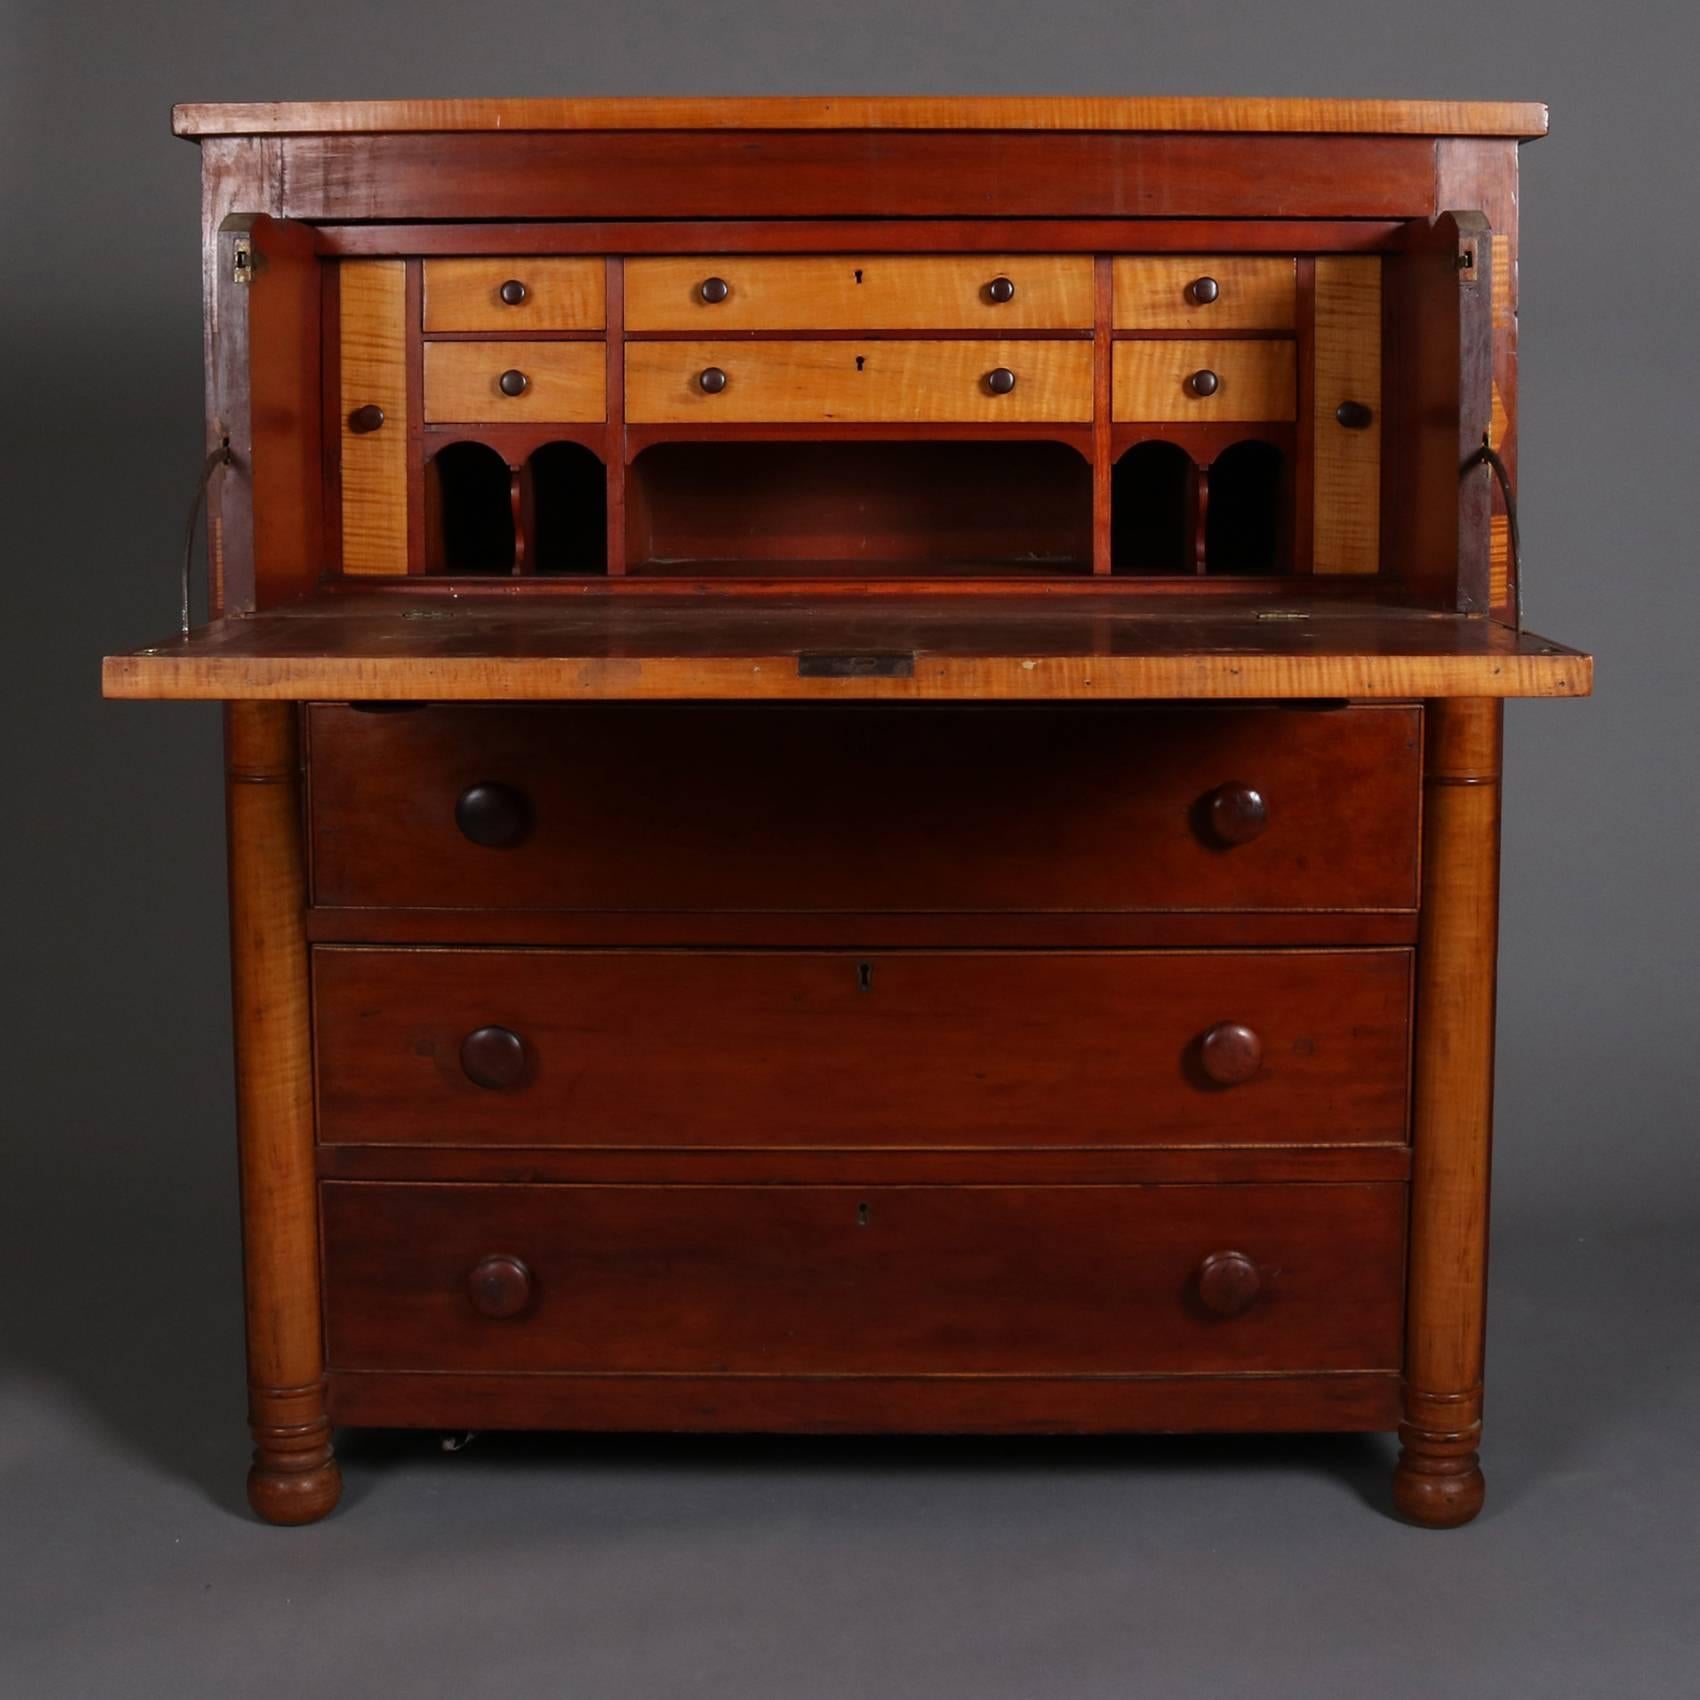 Antique Classical Empire butler's desk feature two toned inlay tiger maple with drop front  desk opening to writing surface with storage drawers and pigeon holes, lower long drawers flanked by half-columns, 19th century

Measures - 44